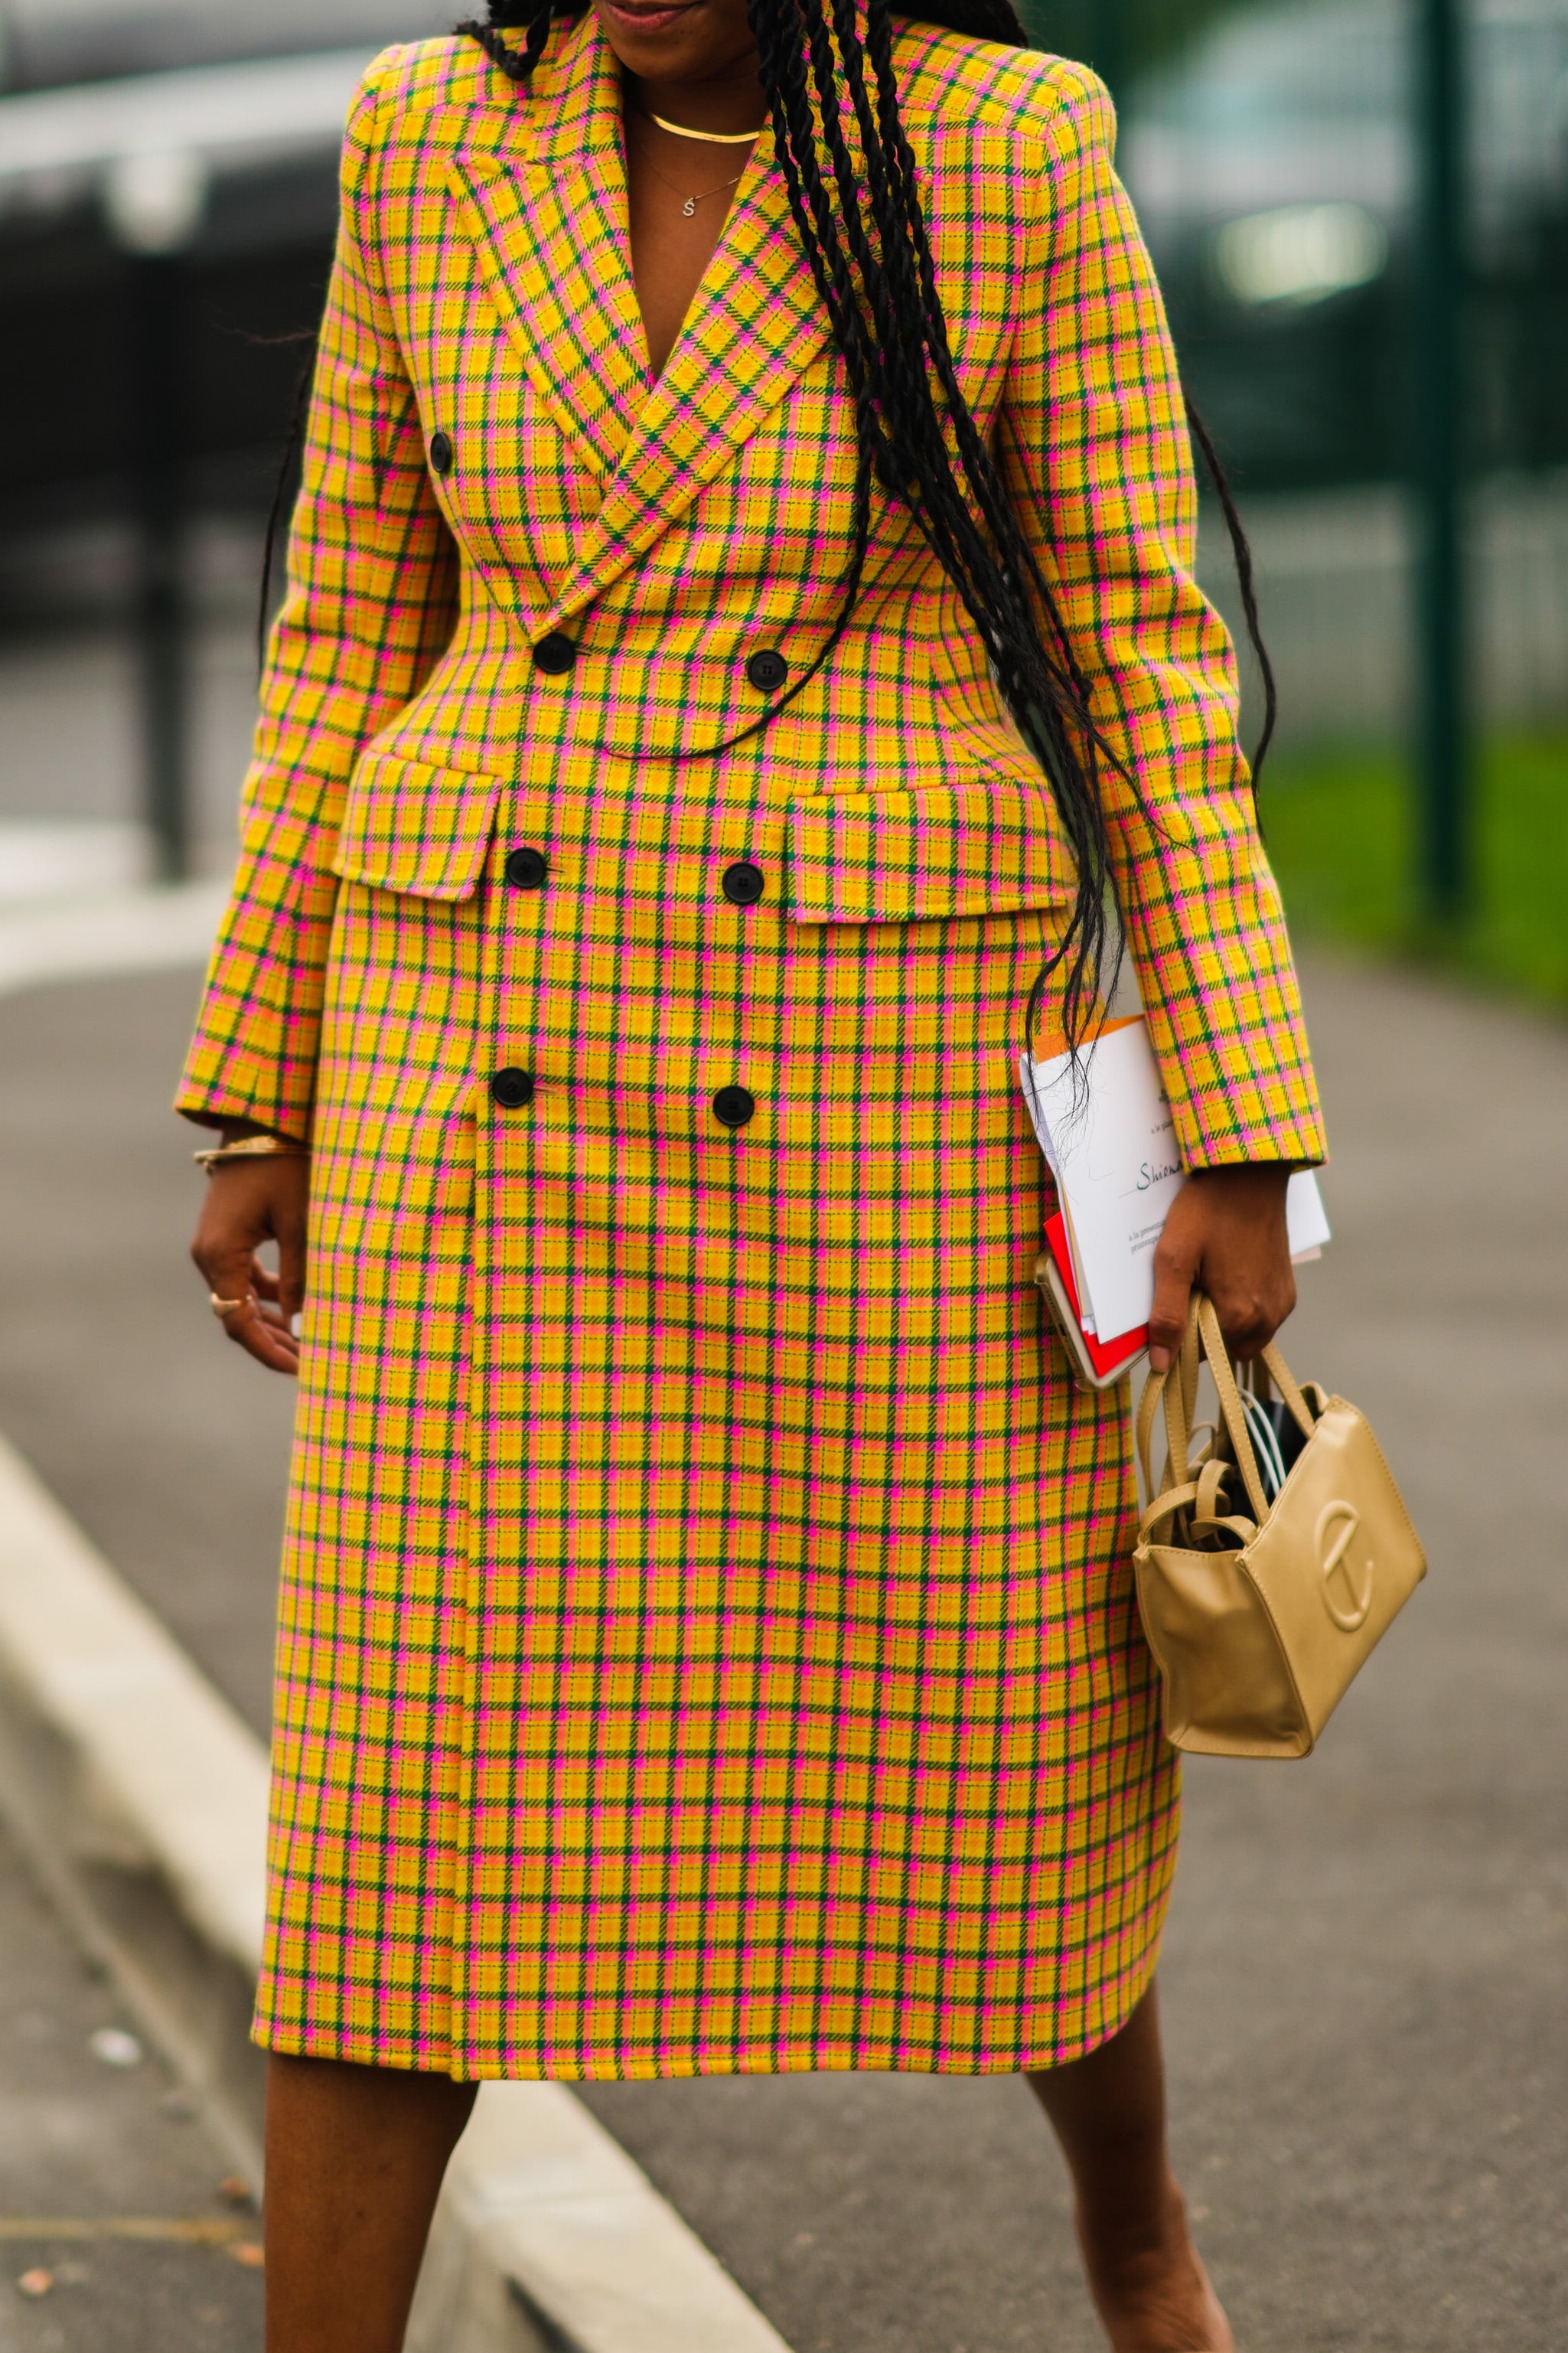 What to wear with a midi dress